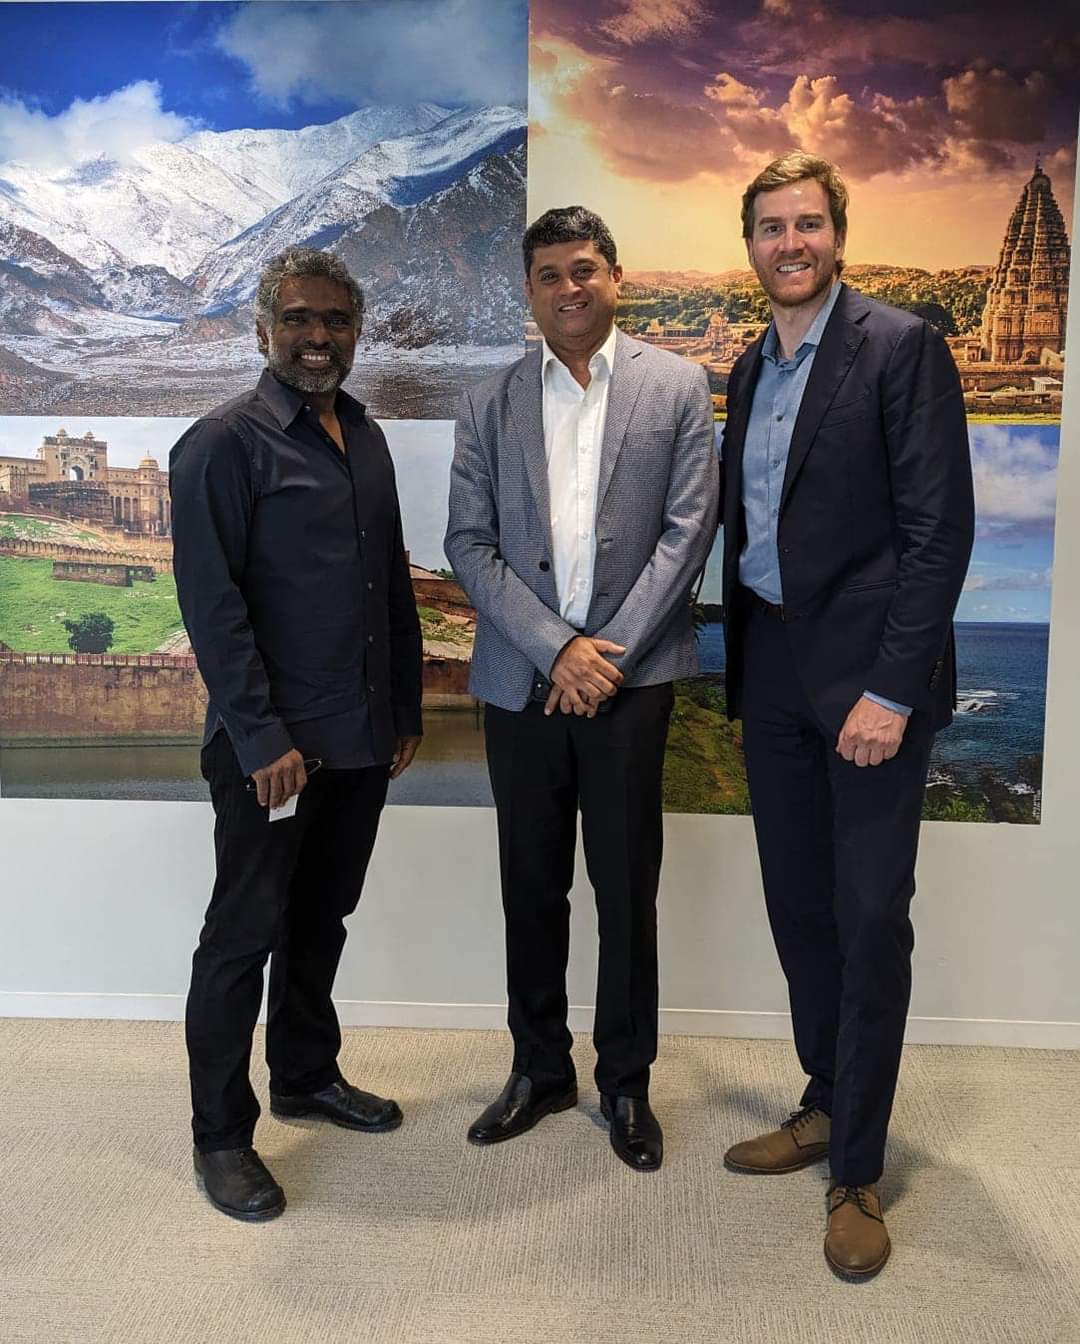 Consul General met Mr. Raju Vegesna, Chief Evangelist and  Mr. Tom Philipps of India tech company Zoho from US HQ Austin on 16 February 2024